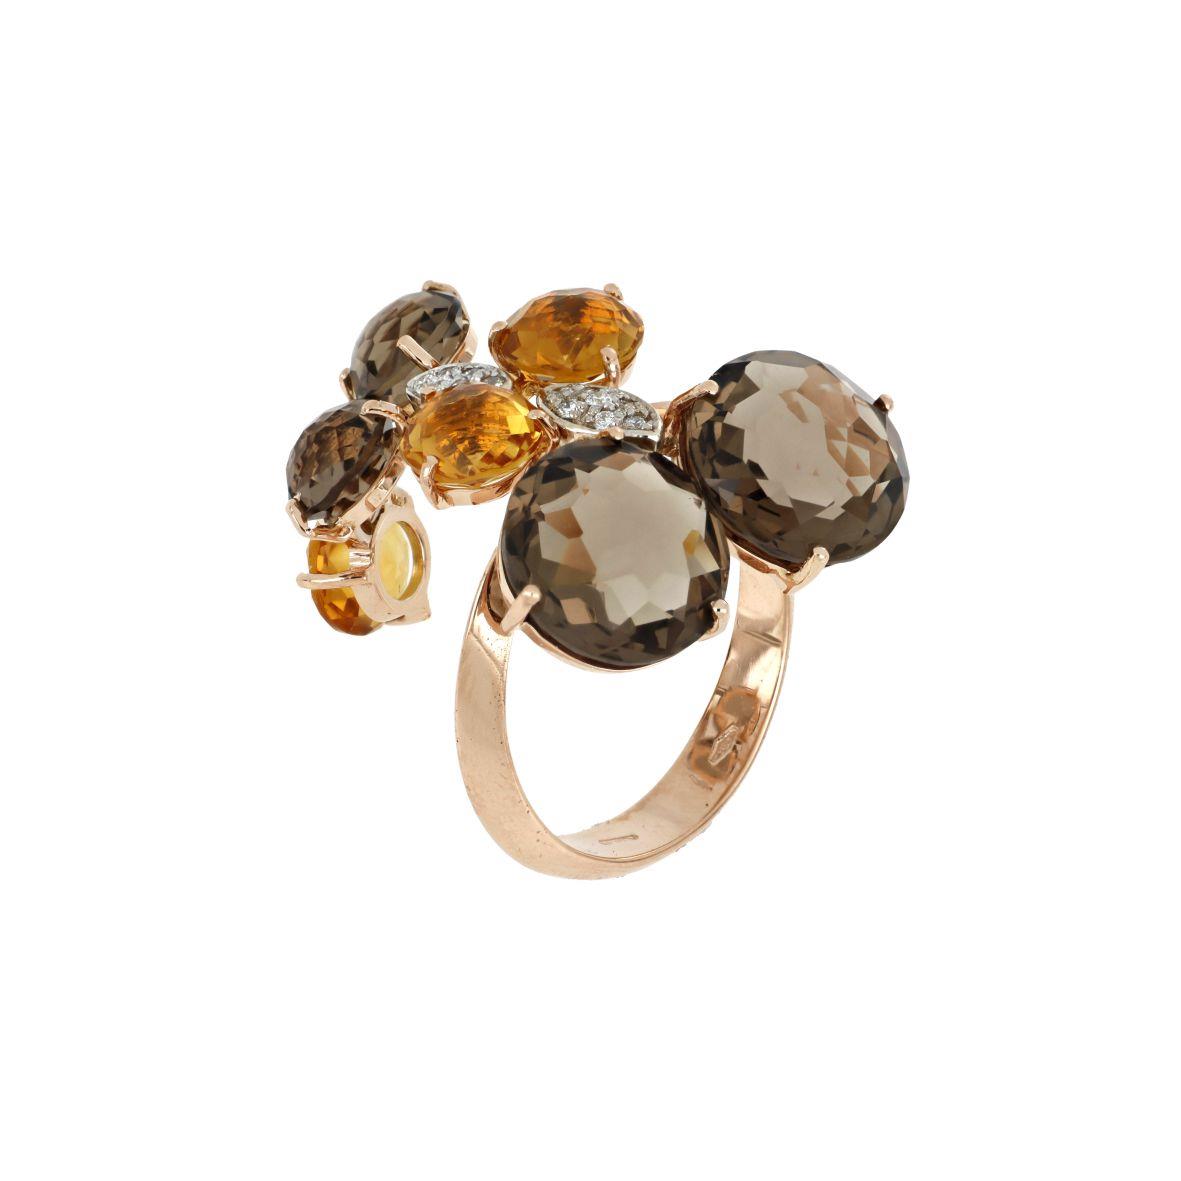 Gold ring with smoky quartz and citrine - GOLD ART